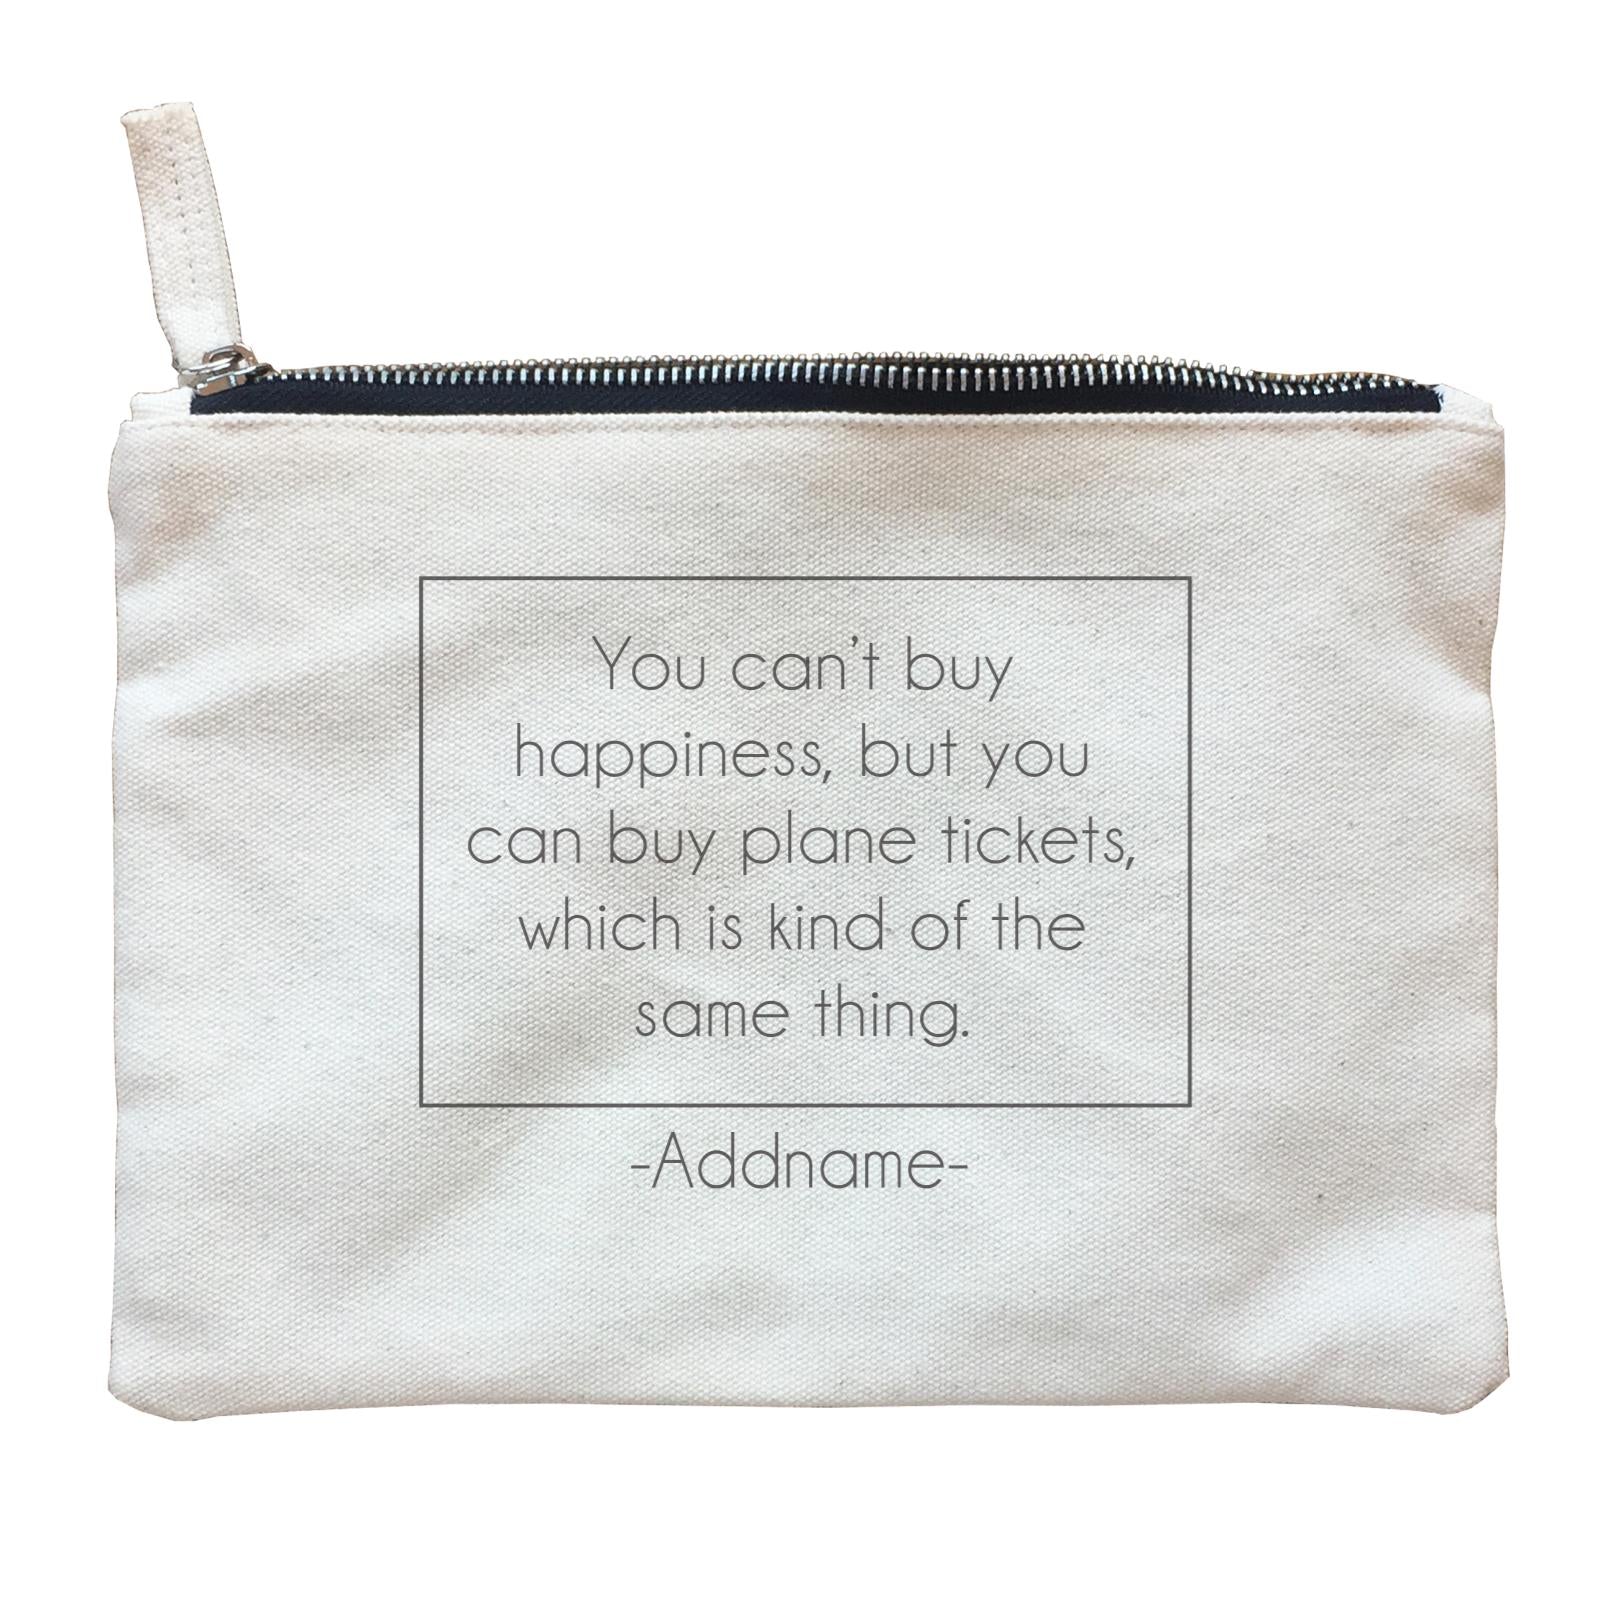 Travel Quotes You Can't Buy Happiness But You Can Buy Plane Tickets Addname Zipper Pouch